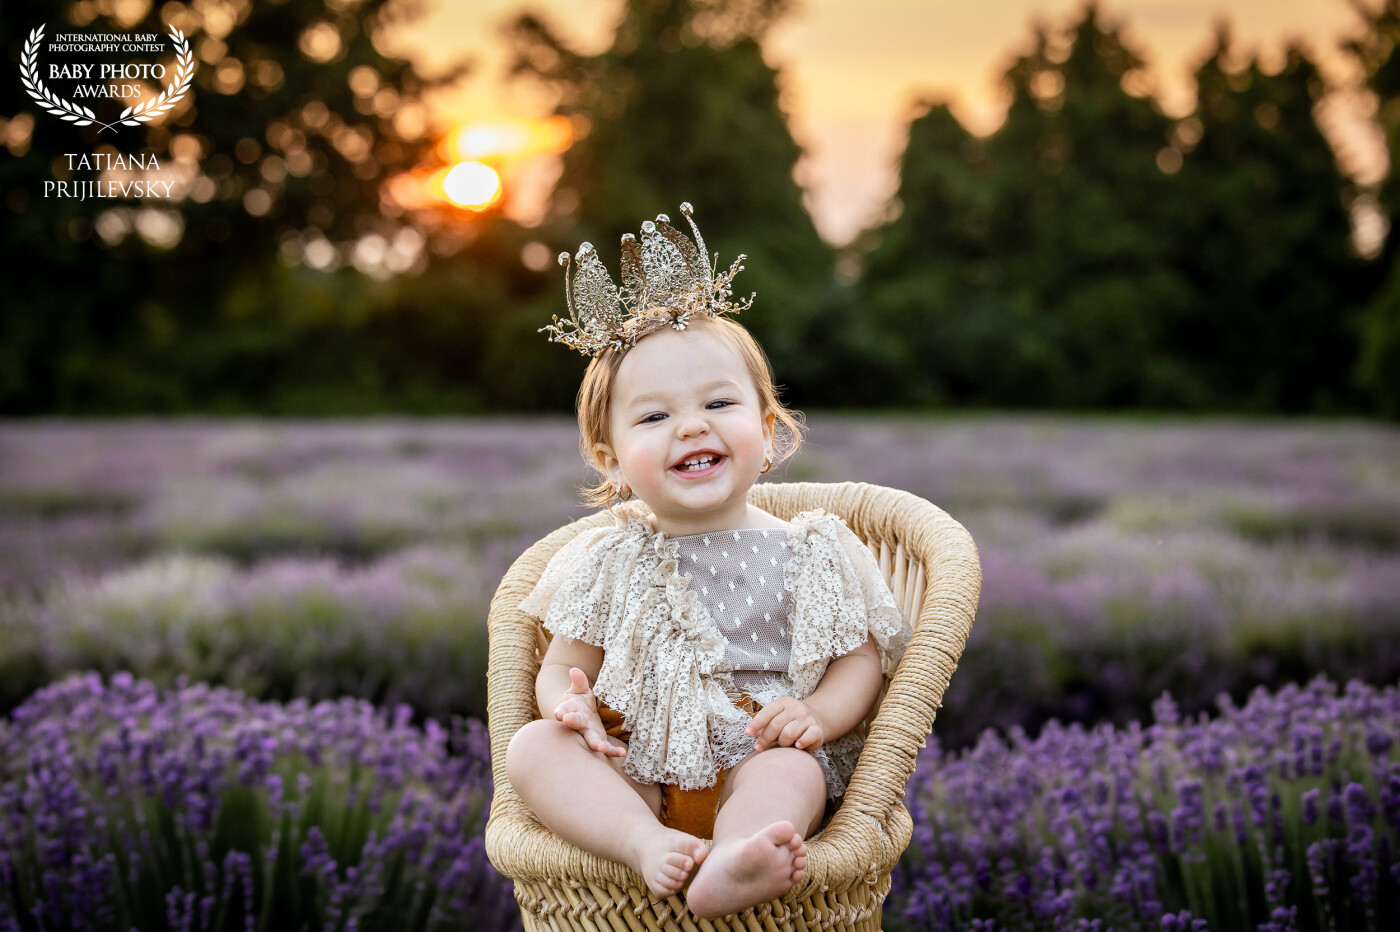 Outdoor photo sessions are the most spectacular and amazing being doing them at sunset time! Celebrating the first birthday of beautiful Thea was the best place to make her feel great!